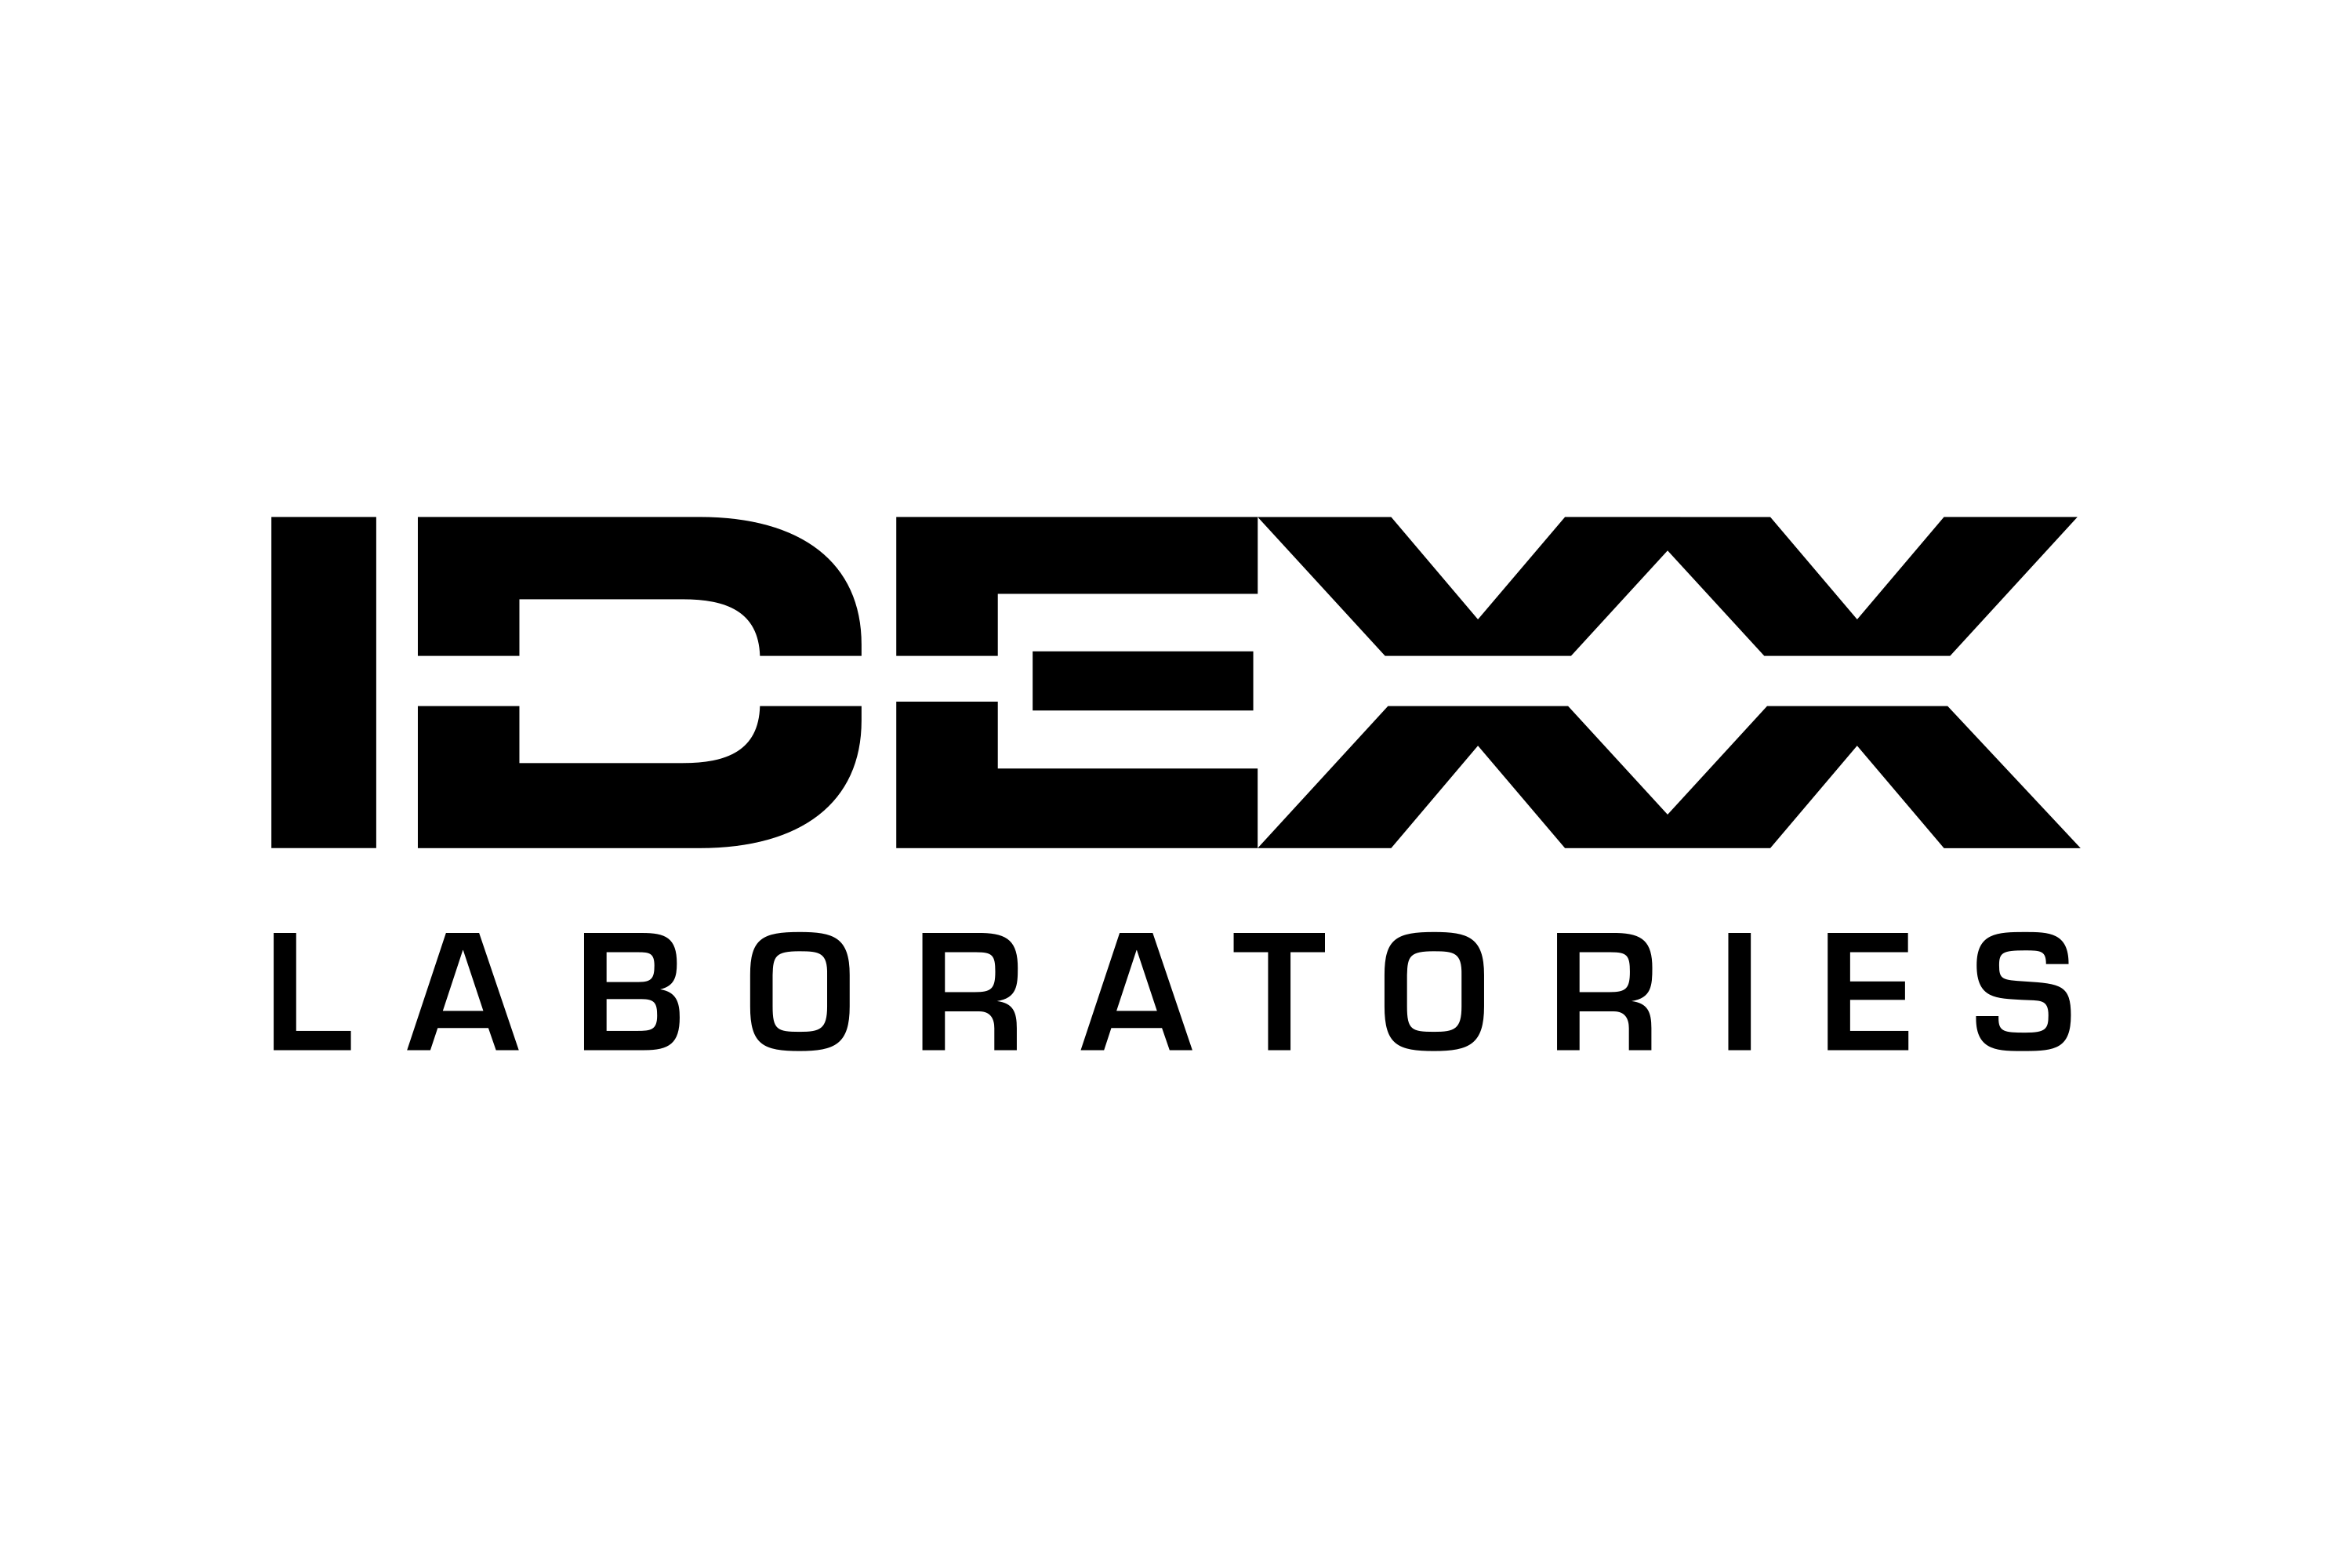 Download Idexx Laboratories Inc Logo In Svg Vector Or Png File